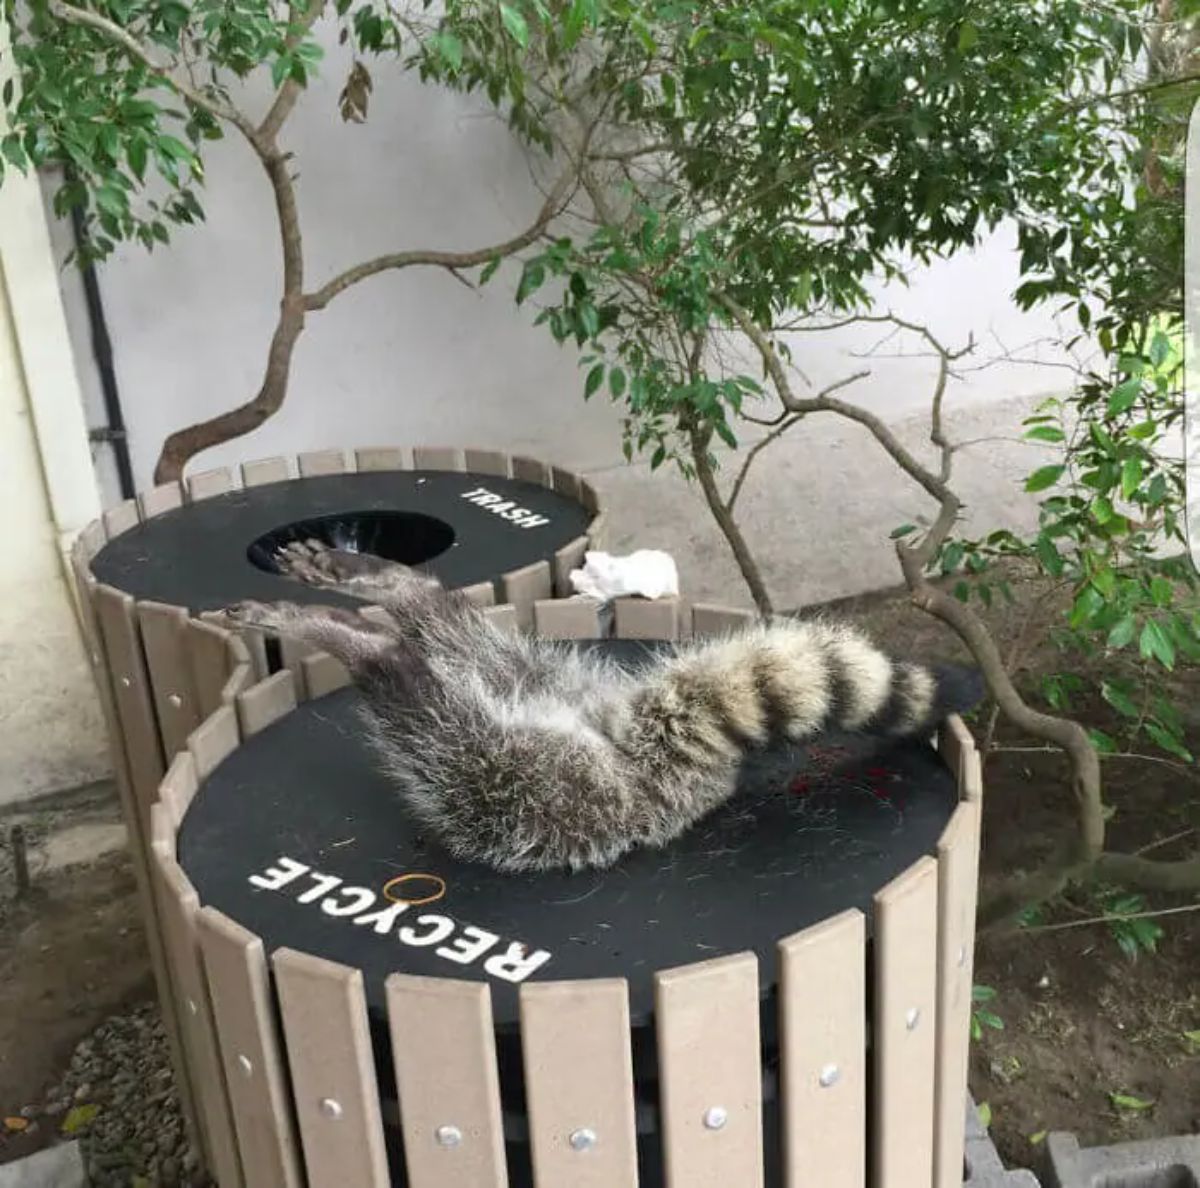 raccoon's back legs and tail sticking out of the small hole at the top of a brown and black recycle bin